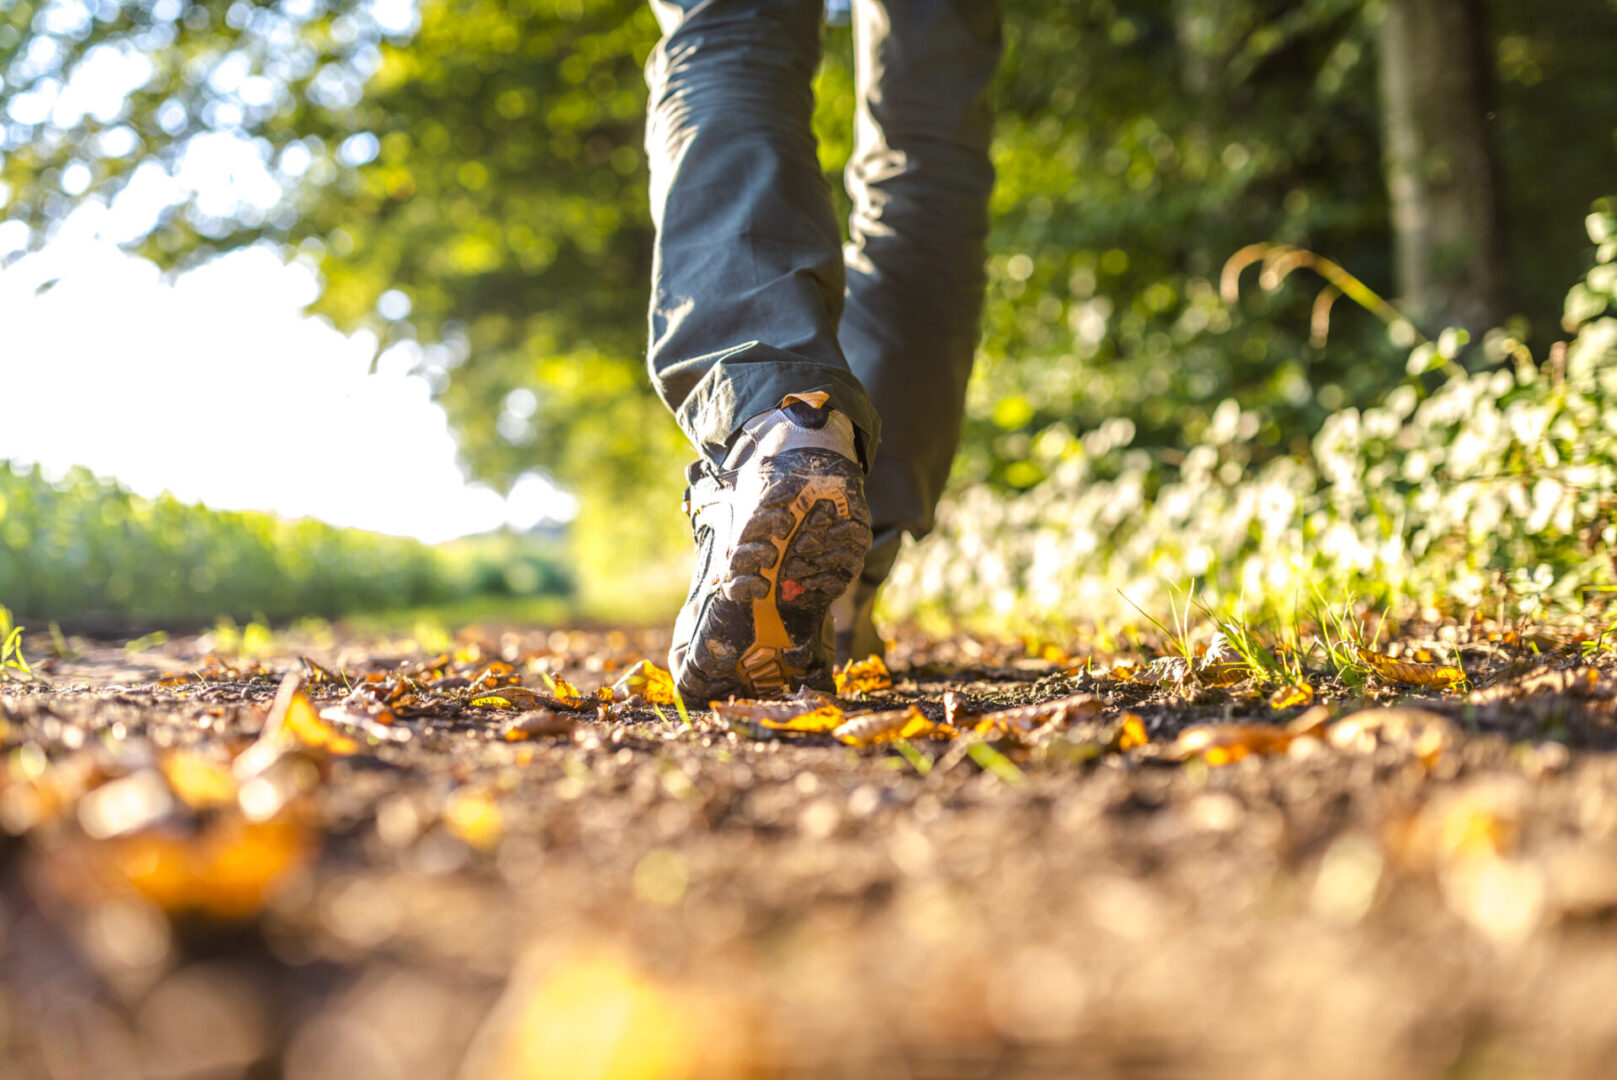 A person walking on the ground with leaves